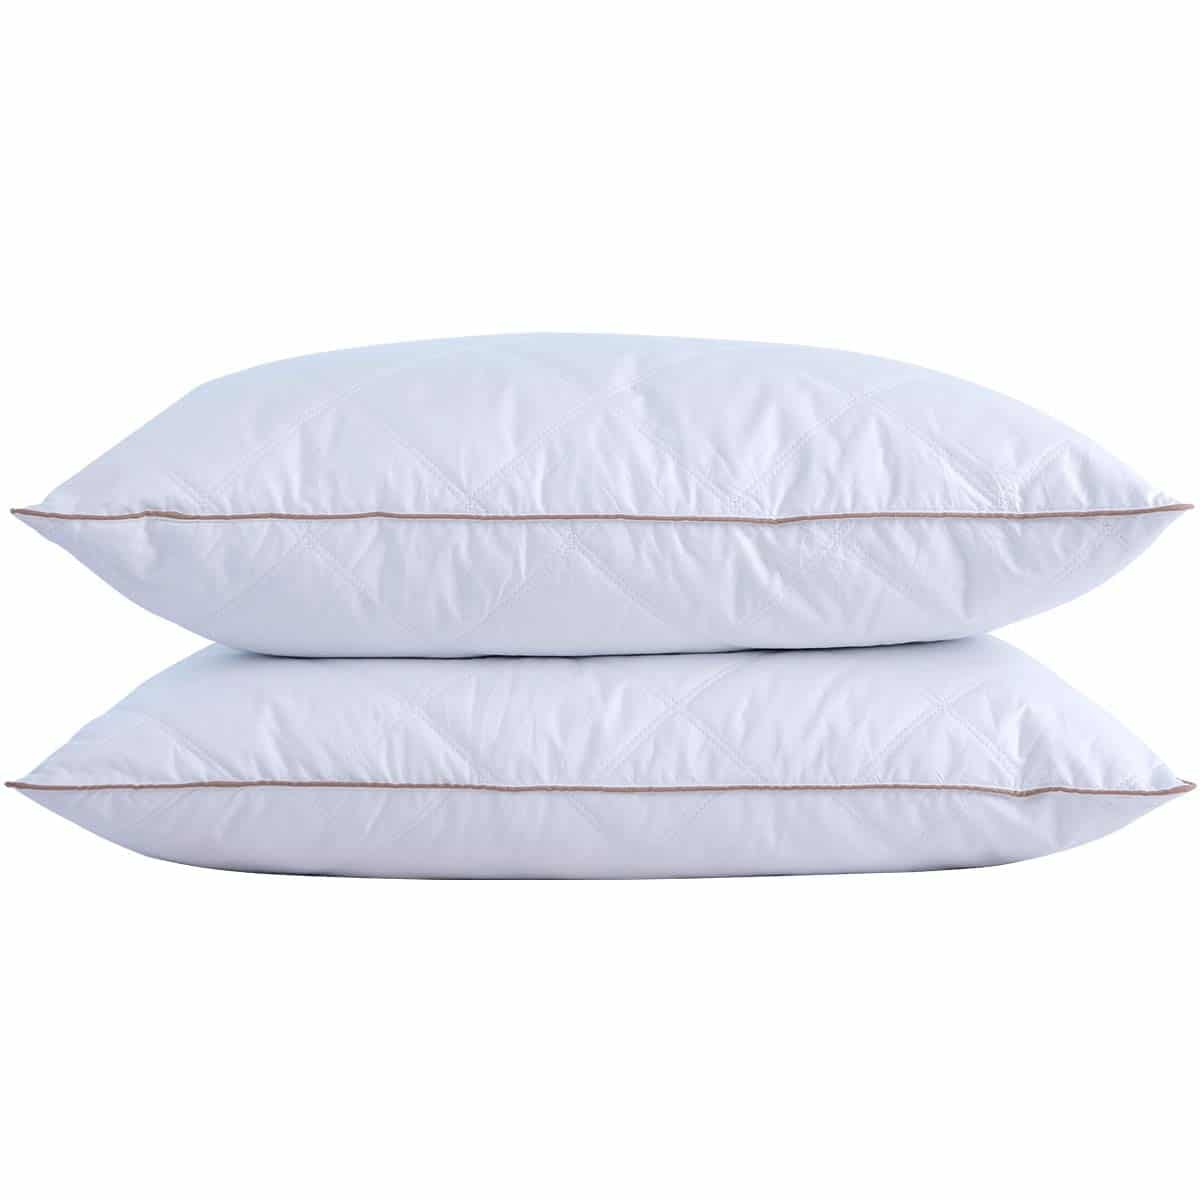 puredown Natural Goose Down Feather Pillows - King Size